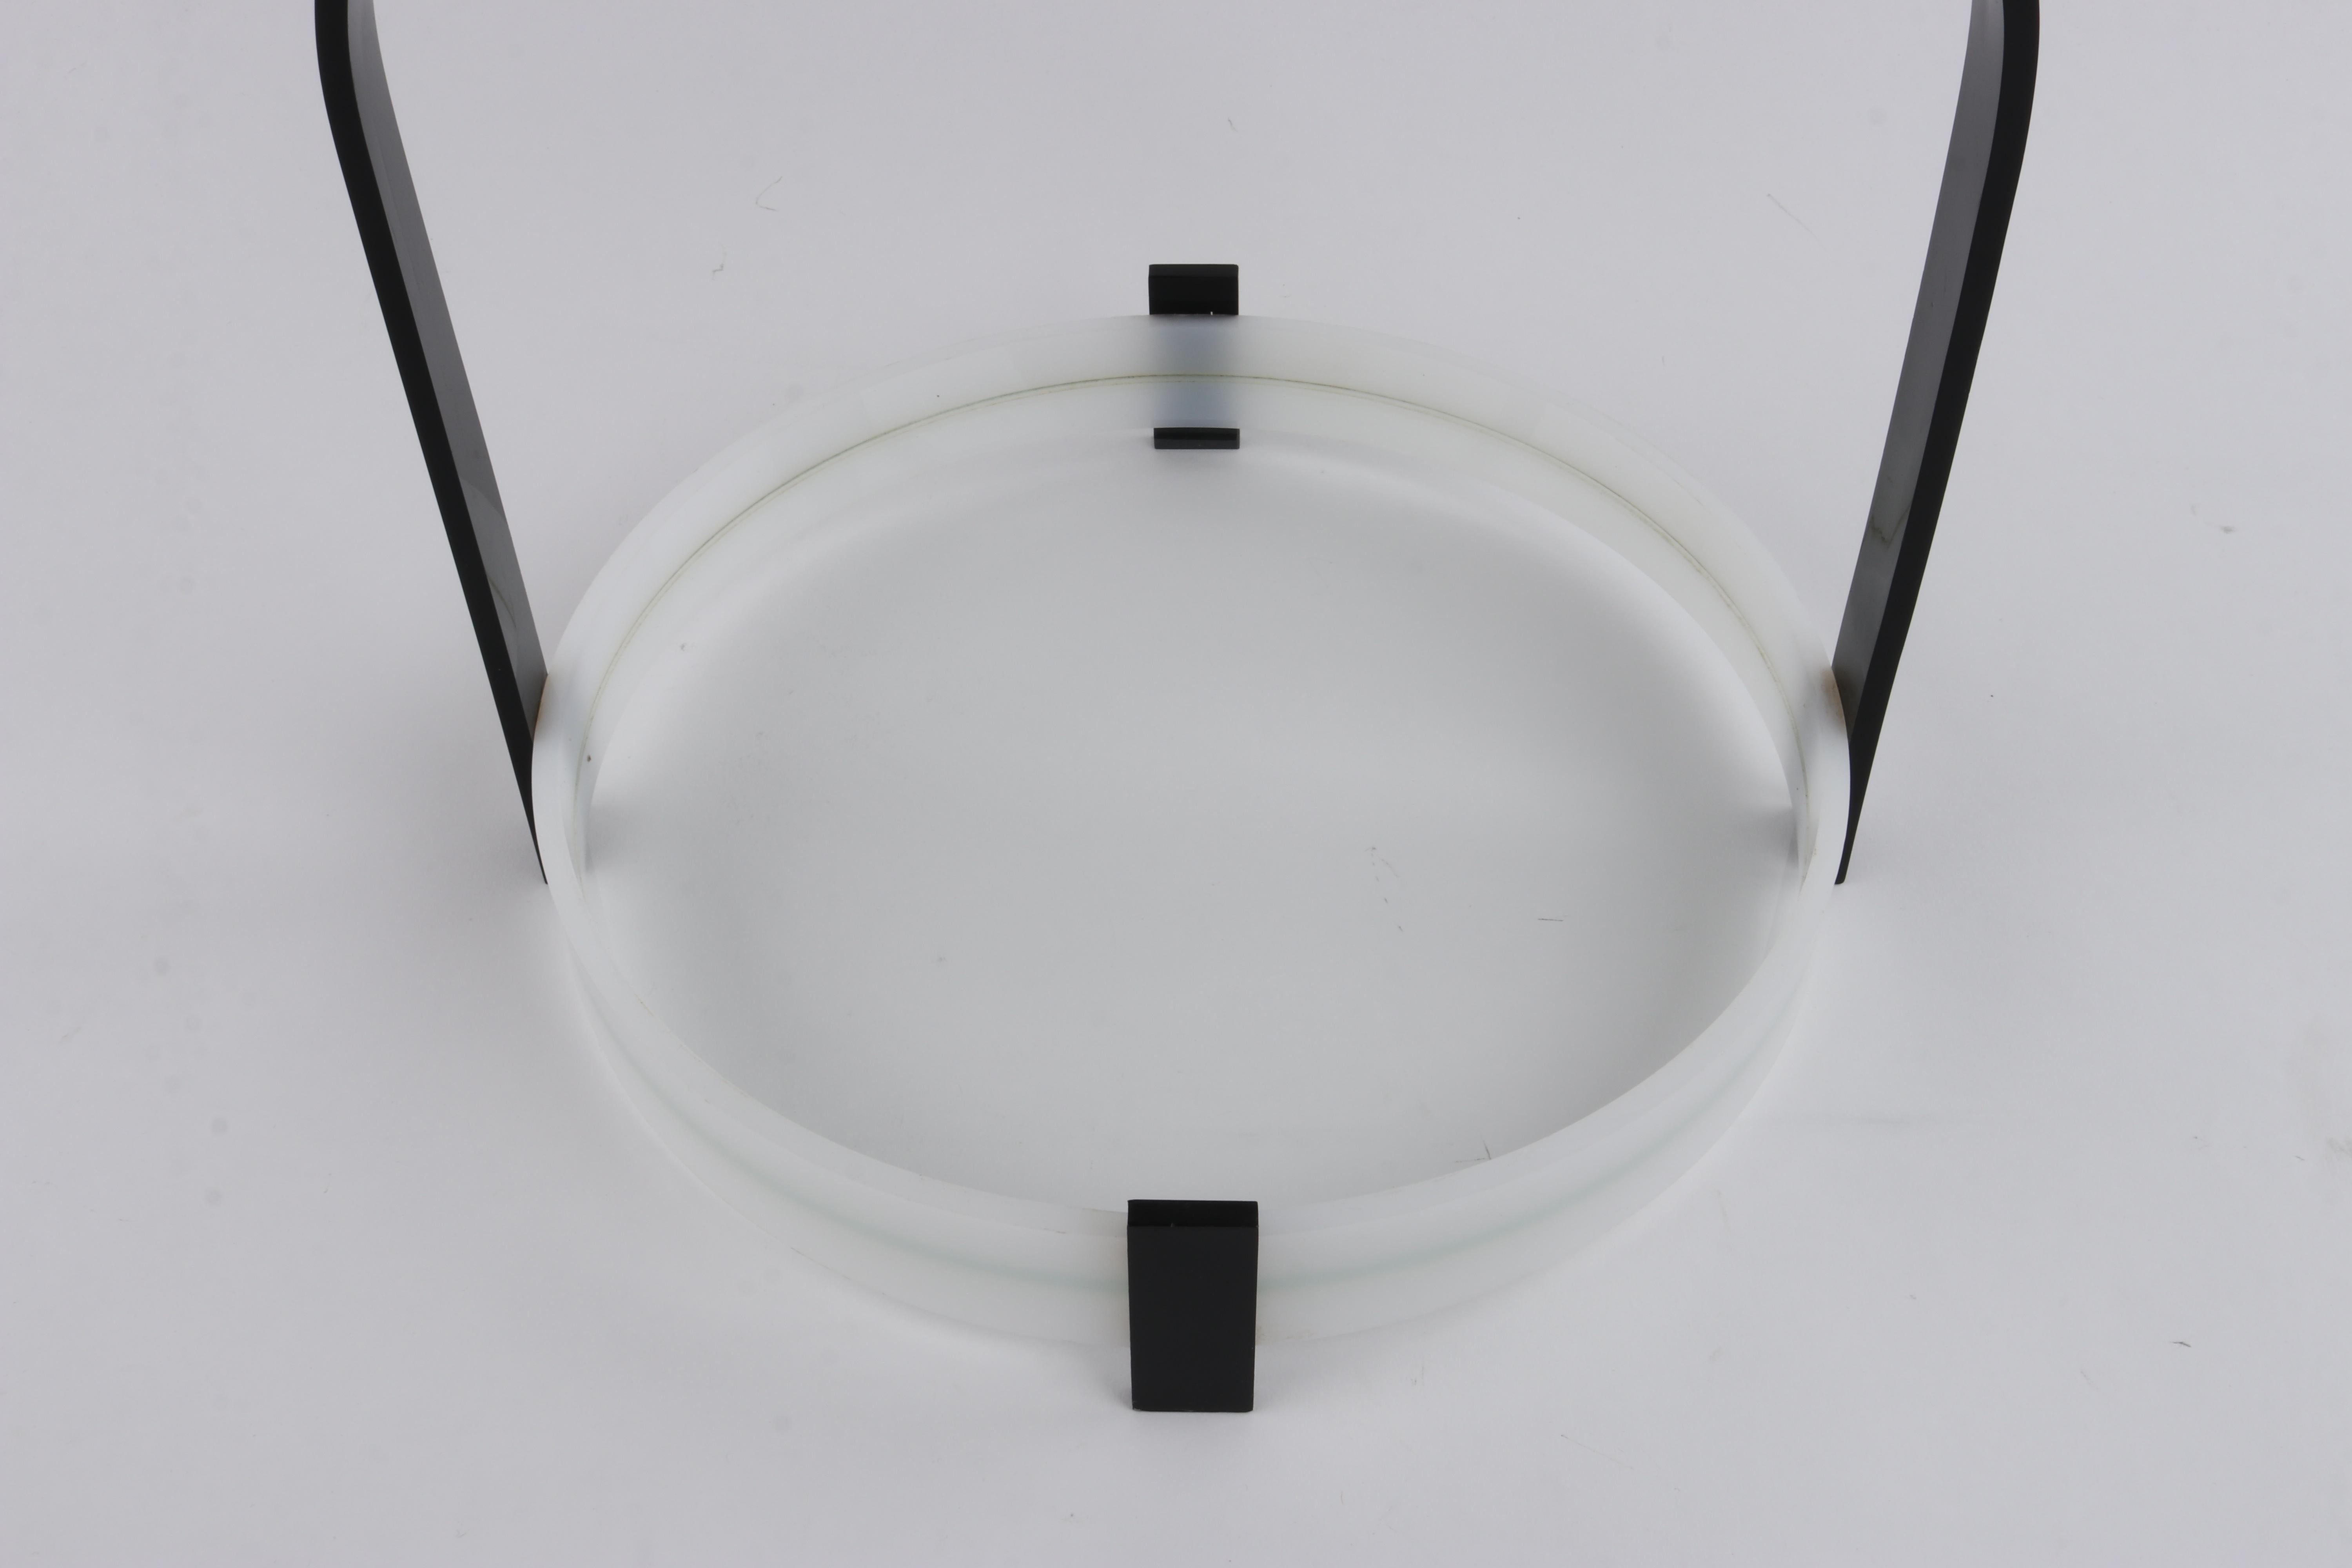 c.1930s-1940s Art Deco Lucite Circular Structured Handheld Serving Beverage Tray For Sale 7